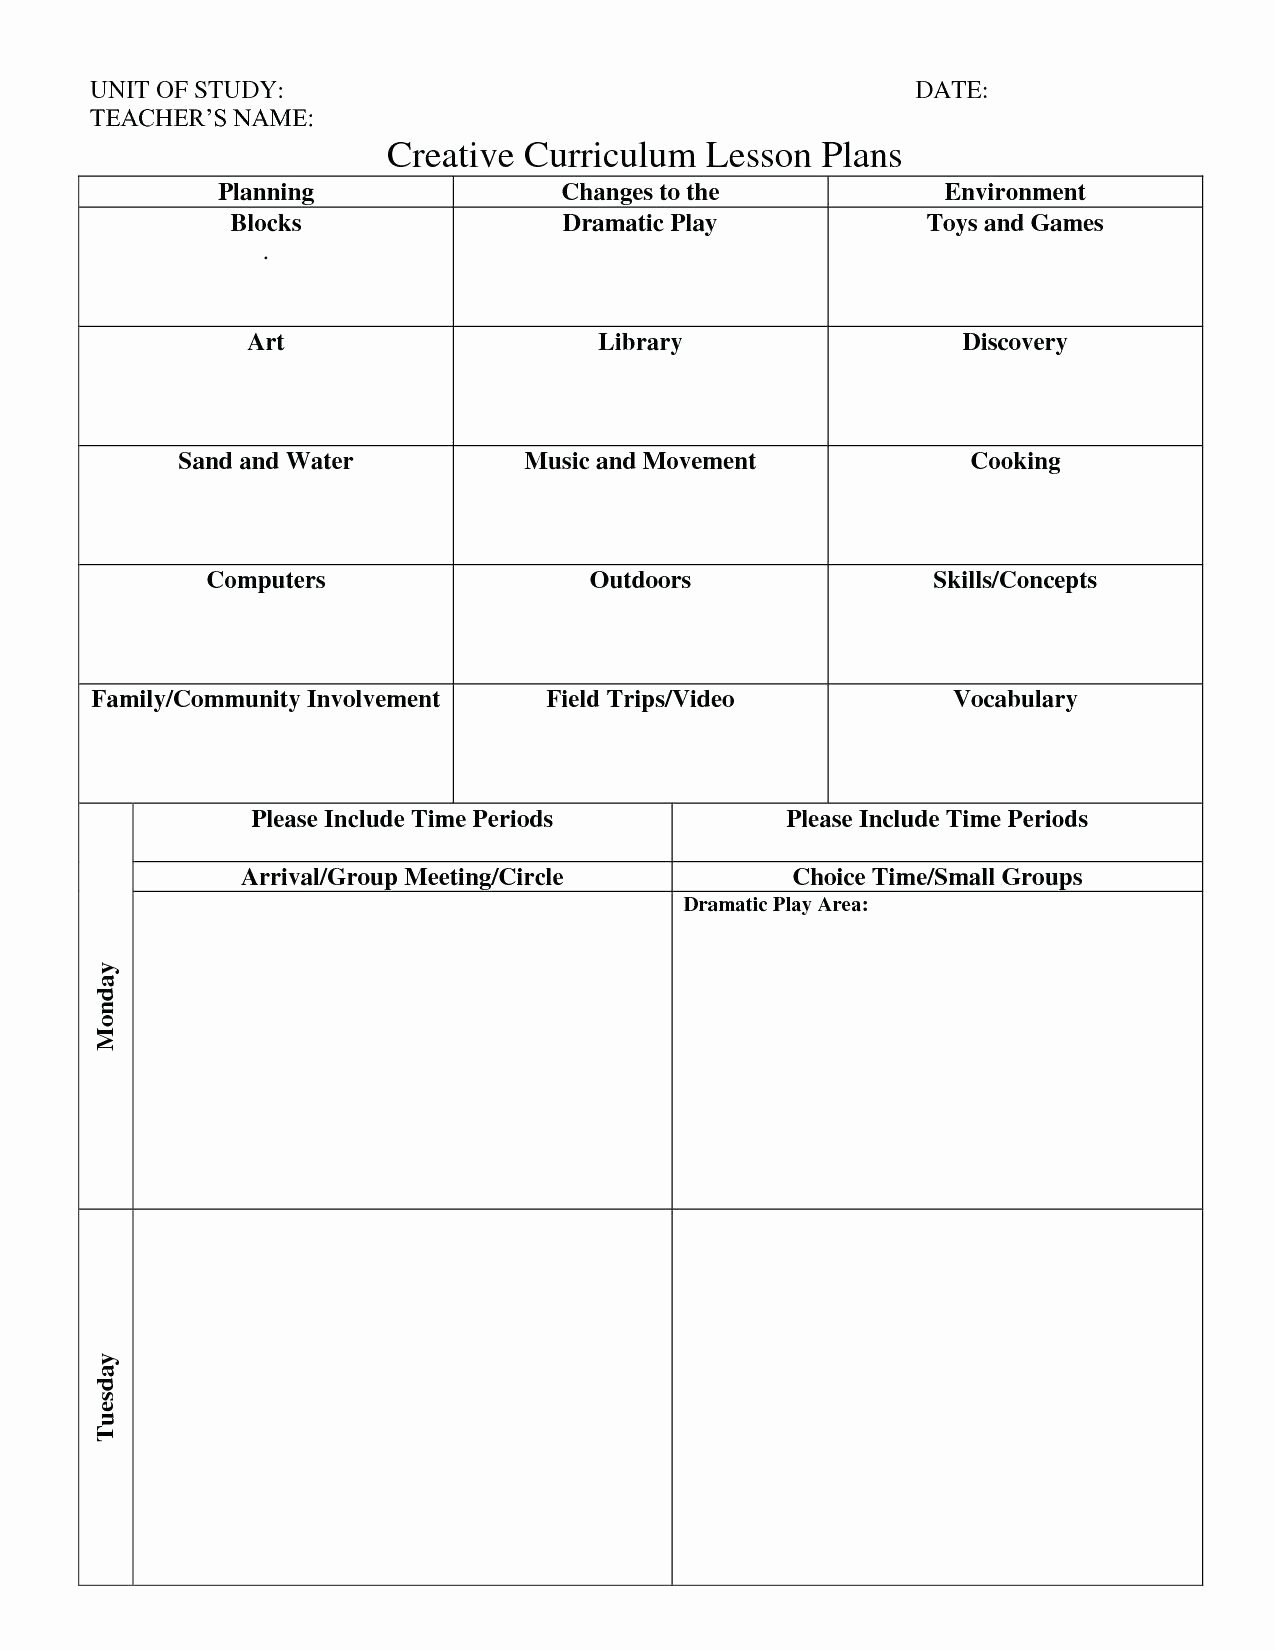 Human Resource Plan Template Elegant Human Resource Plan Template for Project Managers